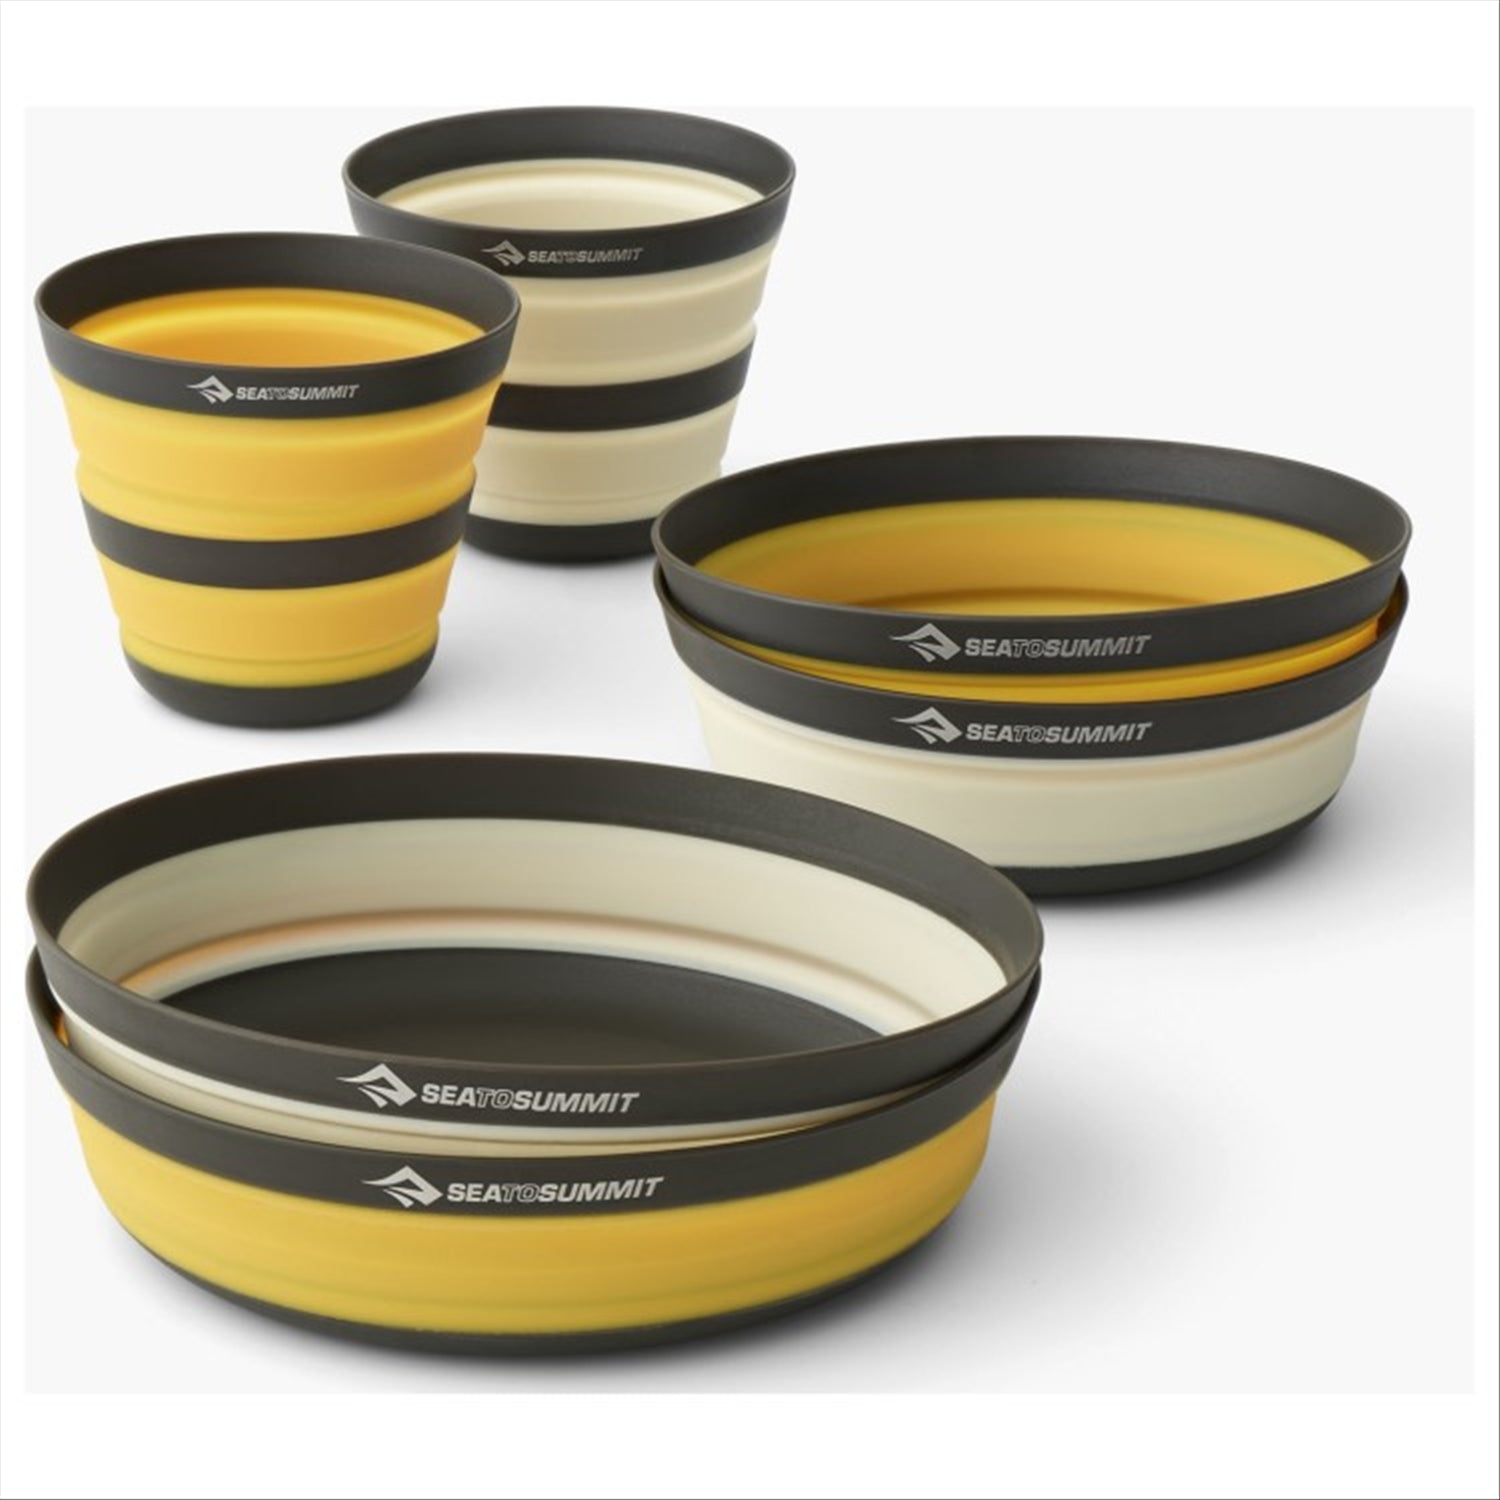 Sea to Summit Sea To Summit Frontier Collapsible Dinnerware Set - 2P, 6 Pieces